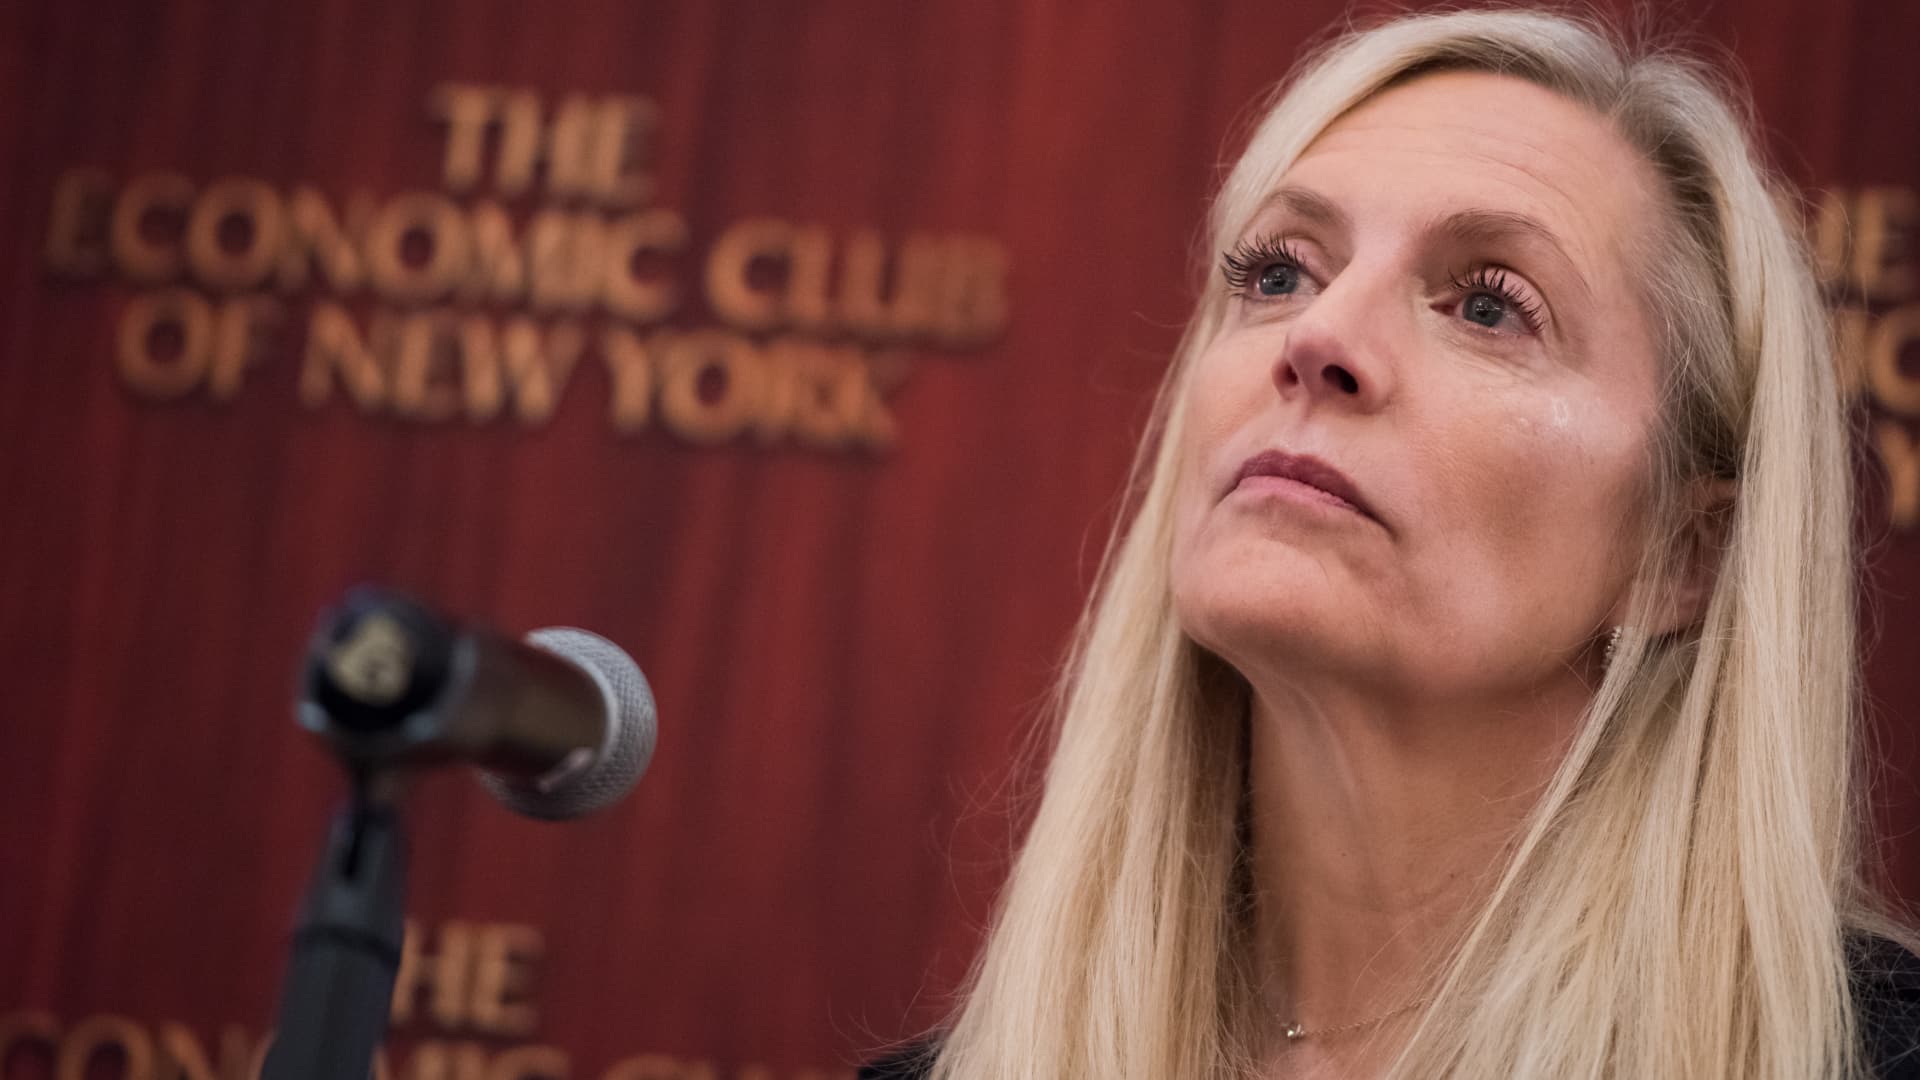 Lael Brainard, governor of the U.S. Federal Reserve, listens during an event sponsored by the Economic Club of New York in New York, U.S., on Tuesday, Sept. 5, 2017.